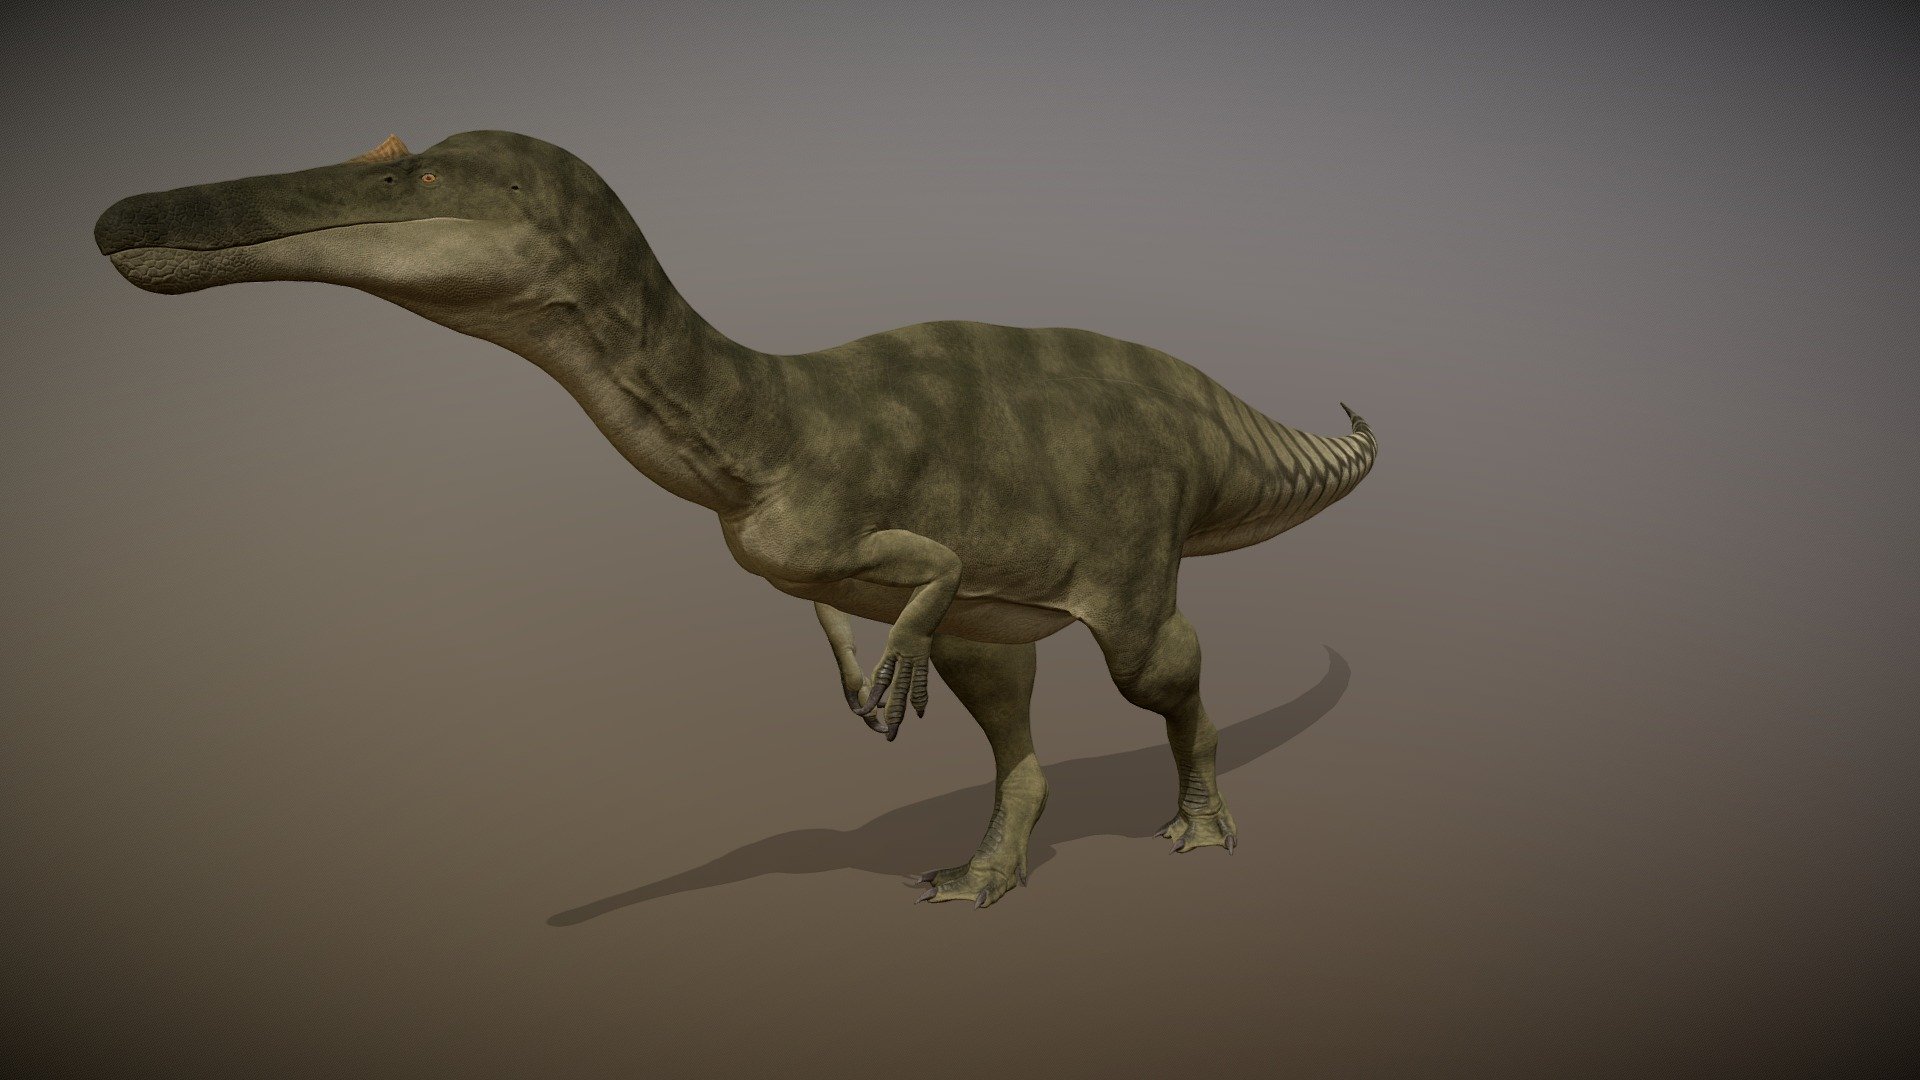 The suchomimus 3d model has been remodeled and reconstructed with a lip, crodilian large flat scales on its face, has webbed feet, and an accurate anatomy. the model is rigged and animated 3d model